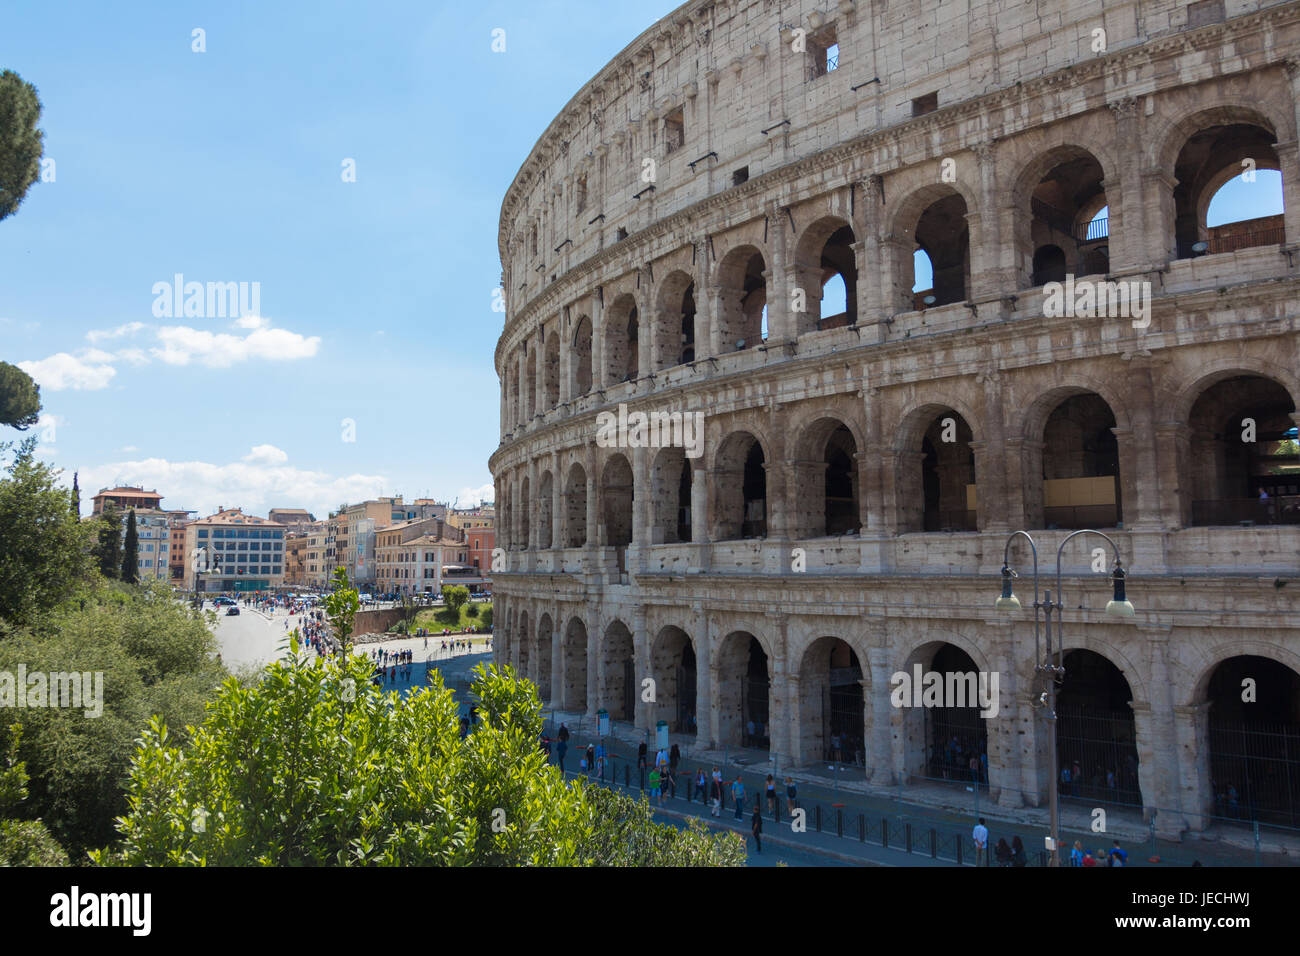 The Magnificent Coliseum - Rome - Italy Stock Photo